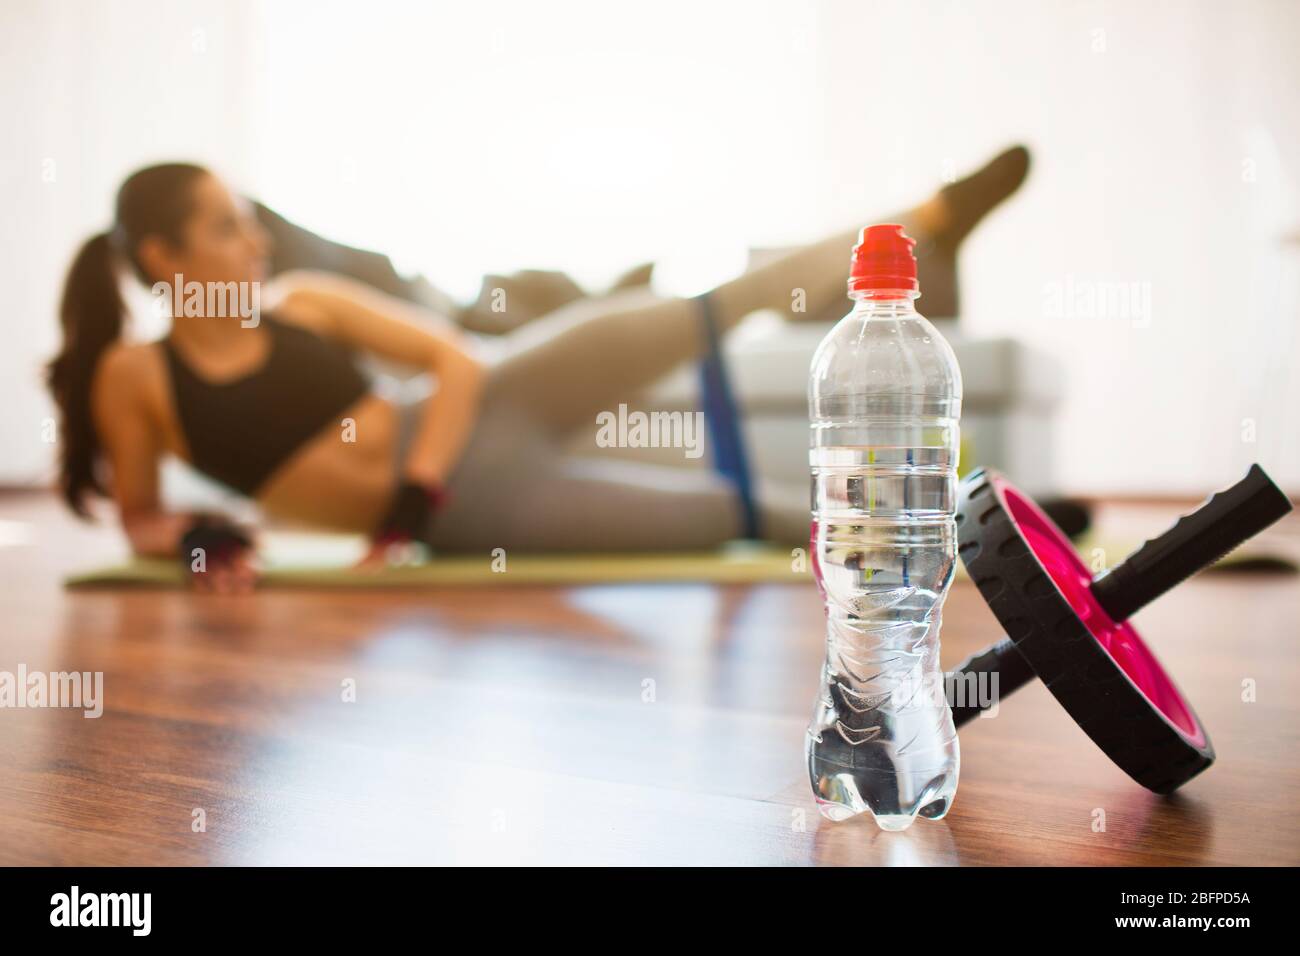 Young woman doing sport workout in room during quarantine. Water bottle and abdominal exercise roller in front. Girl stretching and training with Stock Photo